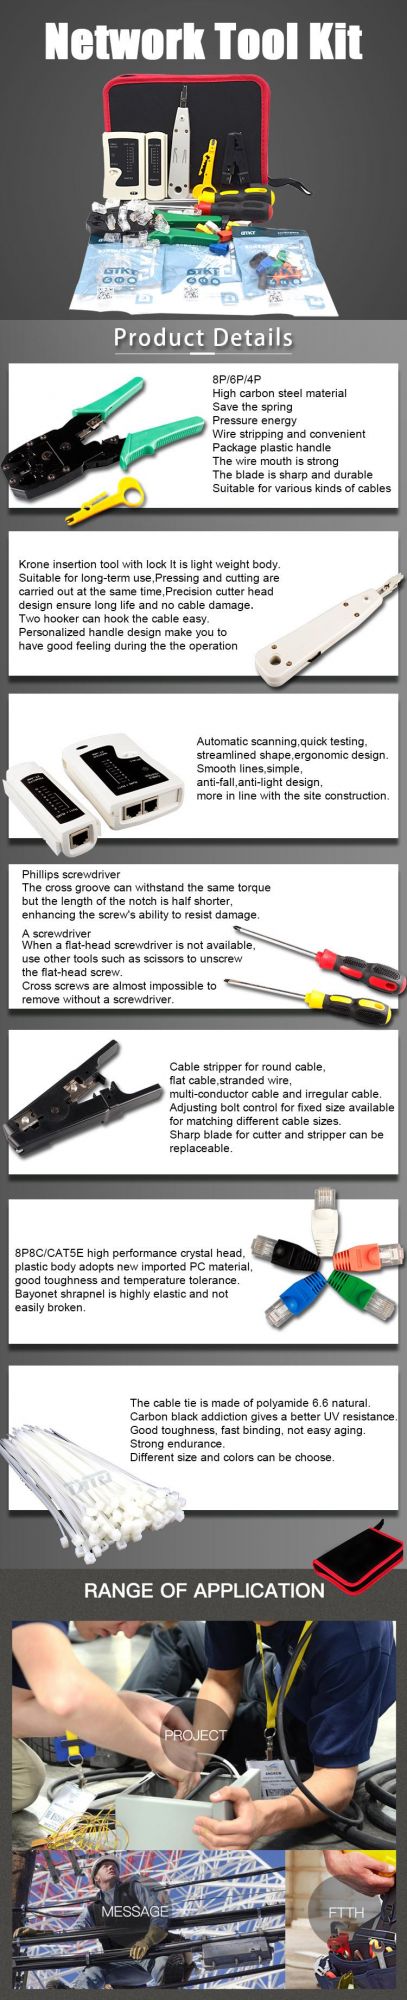 Gcabling Computer Wire Tester Krone Insertion Tool Crimping RJ45 Connector Best Installation Network Tools Kit